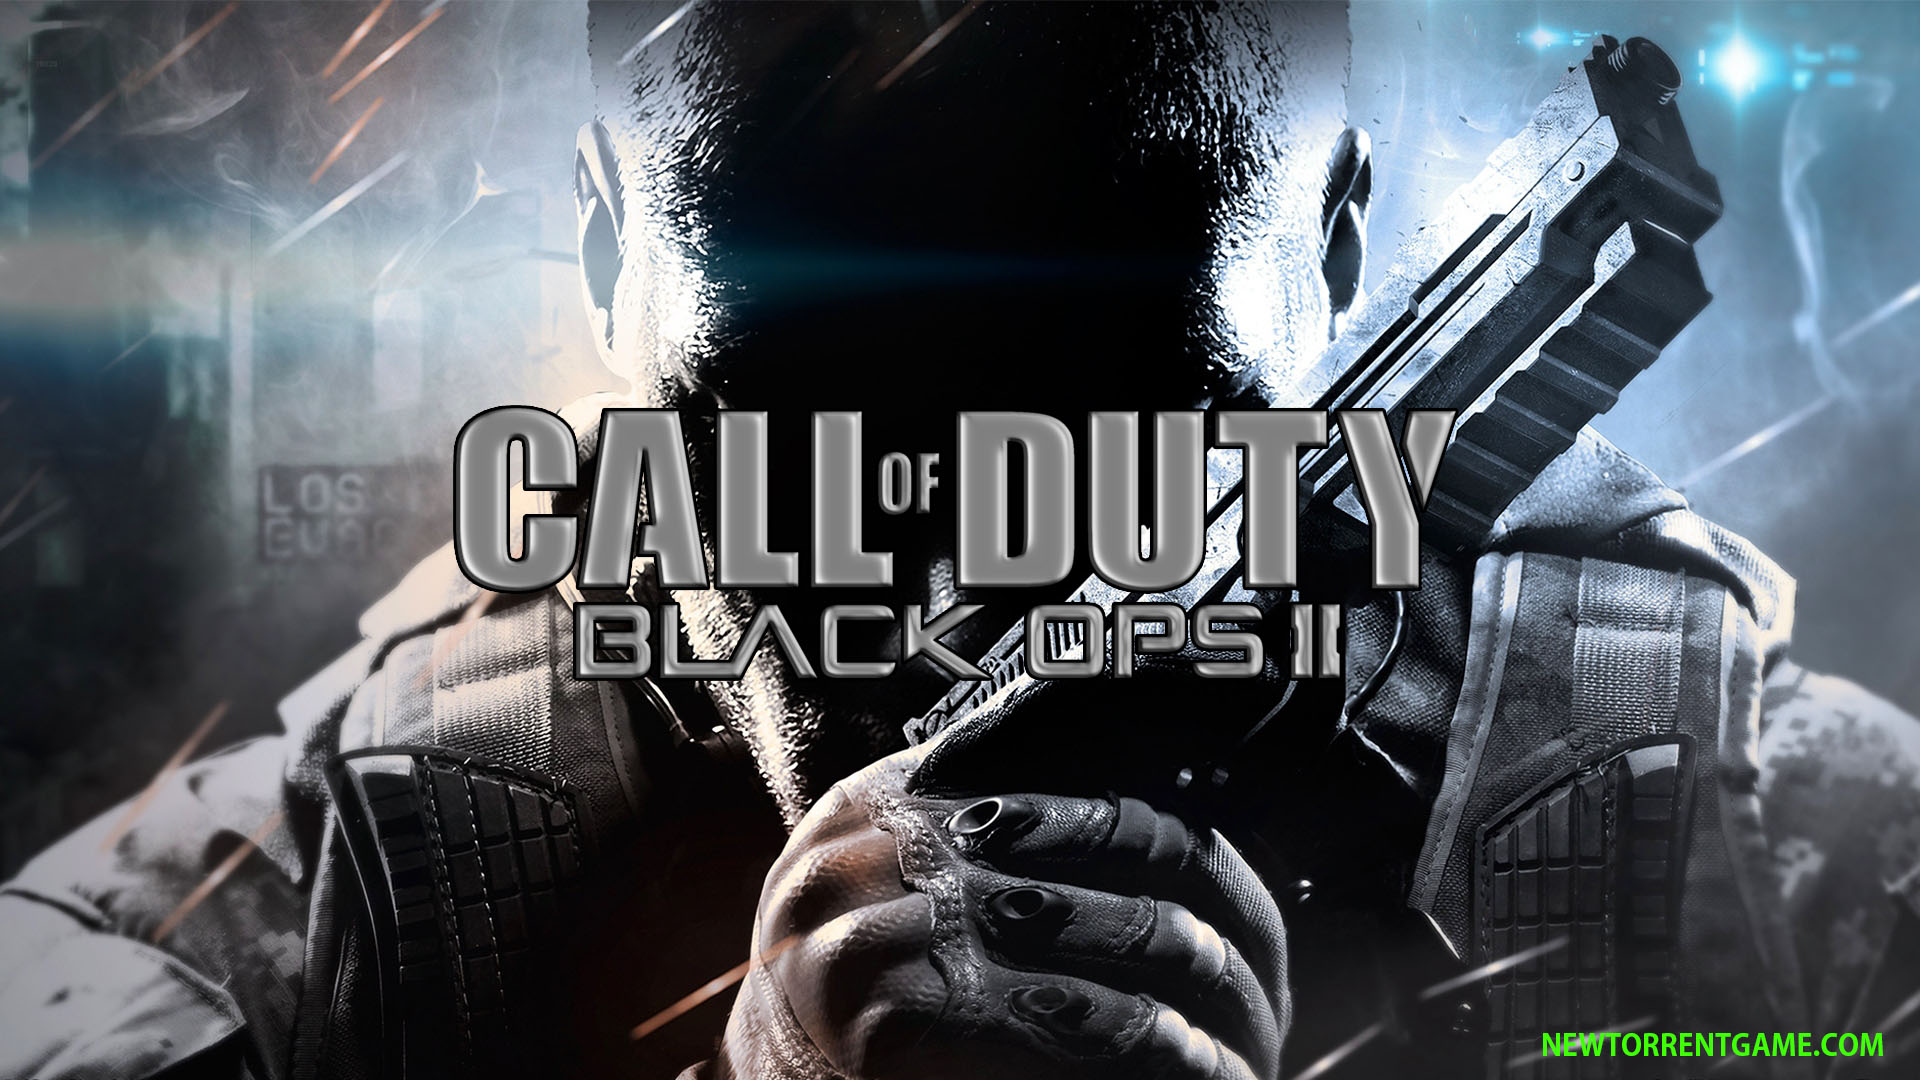 CALL OF DUTY BLACK OPS 2 torrent download